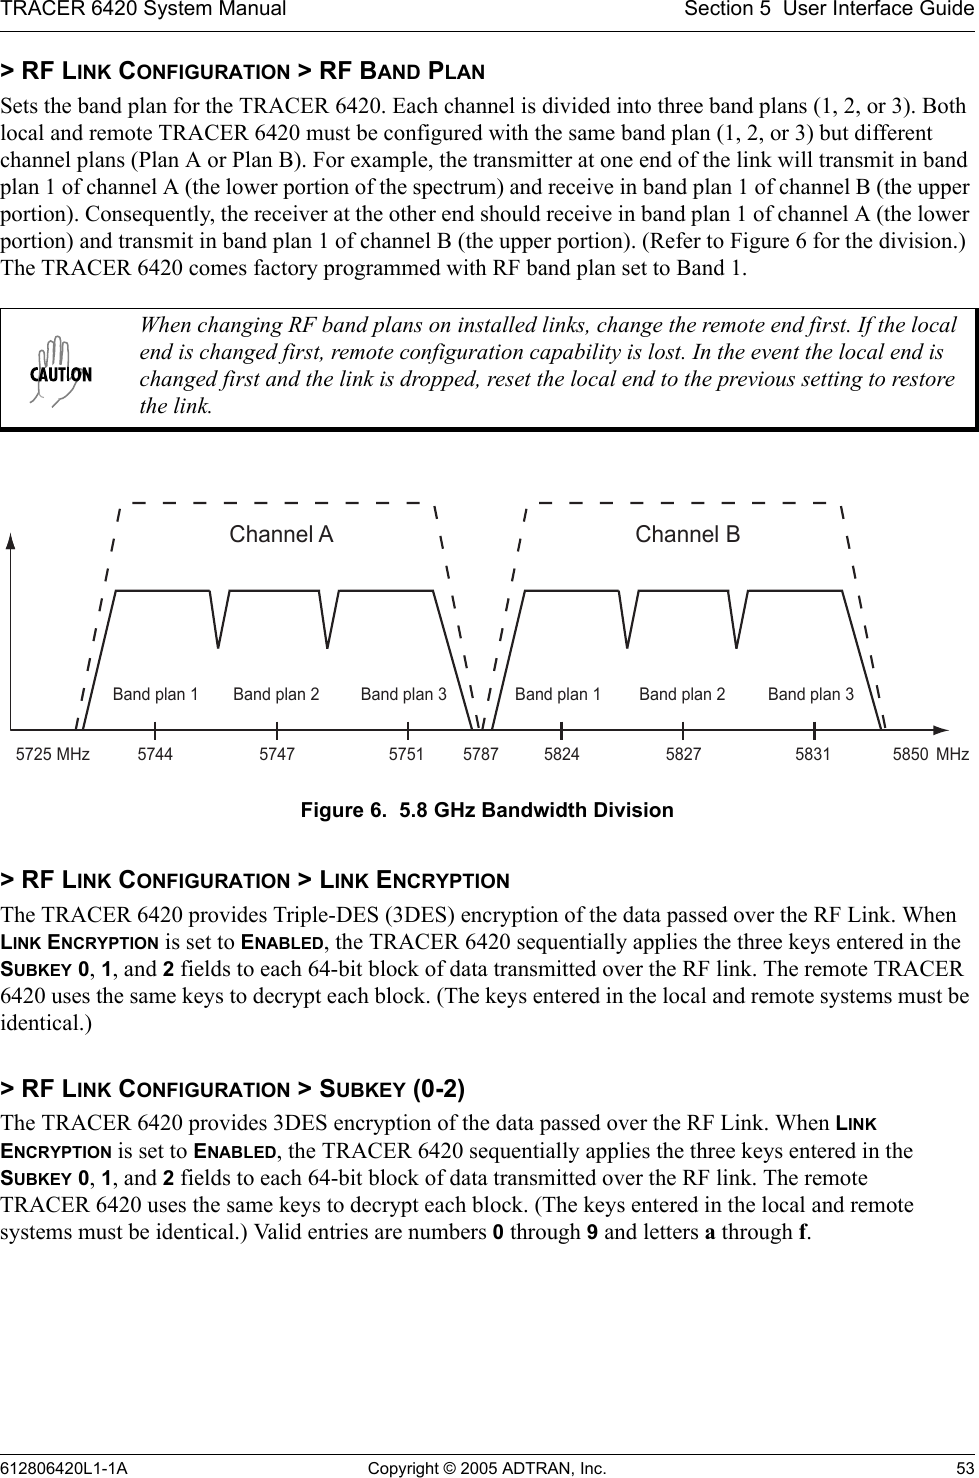 TRACER 6420 System Manual Section 5  User Interface Guide612806420L1-1A Copyright © 2005 ADTRAN, Inc. 53&gt; RF LINK CONFIGURATION &gt; RF BAND PLANSets the band plan for the TRACER 6420. Each channel is divided into three band plans (1, 2, or 3). Both local and remote TRACER 6420 must be configured with the same band plan (1, 2, or 3) but different channel plans (Plan A or Plan B). For example, the transmitter at one end of the link will transmit in band plan 1 of channel A (the lower portion of the spectrum) and receive in band plan 1 of channel B (the upper portion). Consequently, the receiver at the other end should receive in band plan 1 of channel A (the lower portion) and transmit in band plan 1 of channel B (the upper portion). (Refer to Figure 6 for the division.) The TRACER 6420 comes factory programmed with RF band plan set to Band 1.Figure 6.  5.8 GHz Bandwidth Division&gt; RF LINK CONFIGURATION &gt; LINK ENCRYPTIONThe TRACER 6420 provides Triple-DES (3DES) encryption of the data passed over the RF Link. When LINK ENCRYPTION is set to ENABLED, the TRACER 6420 sequentially applies the three keys entered in the SUBKEY 0, 1, and 2 fields to each 64-bit block of data transmitted over the RF link. The remote TRACER 6420 uses the same keys to decrypt each block. (The keys entered in the local and remote systems must be identical.)&gt; RF LINK CONFIGURATION &gt; SUBKEY (0-2)The TRACER 6420 provides 3DES encryption of the data passed over the RF Link. When LINK ENCRYPTION is set to ENABLED, the TRACER 6420 sequentially applies the three keys entered in the SUBKEY 0, 1, and 2 fields to each 64-bit block of data transmitted over the RF link. The remote TRACER 6420 uses the same keys to decrypt each block. (The keys entered in the local and remote systems must be identical.) Valid entries are numbers 0 through 9 and letters a through f. When changing RF band plans on installed links, change the remote end first. If the local end is changed first, remote configuration capability is lost. In the event the local end is changed first and the link is dropped, reset the local end to the previous setting to restore the link.Channel A57445725 5787 58505747 5751MHz MHzBand plan 3Band plan 2Band plan 1Channel B5824 5827 5831Band plan 3Band plan 2Band plan 1